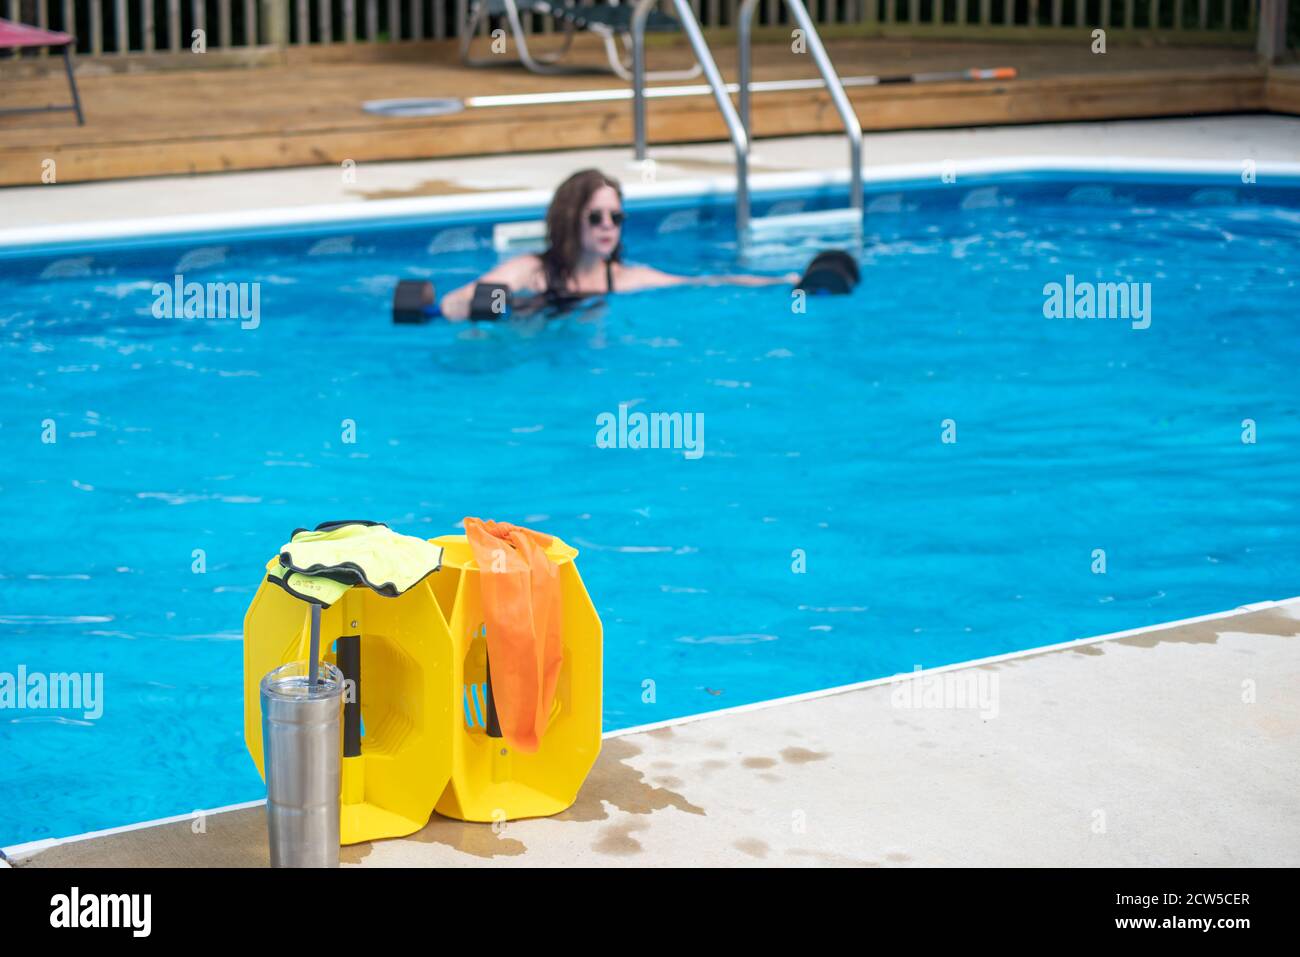 Woman Working Out Alone In Home Pool With Focus On Poolside Aqua Exercise Equipment In Foreground Natural Light Copy Space Social Distancing Stock Photo Alamy